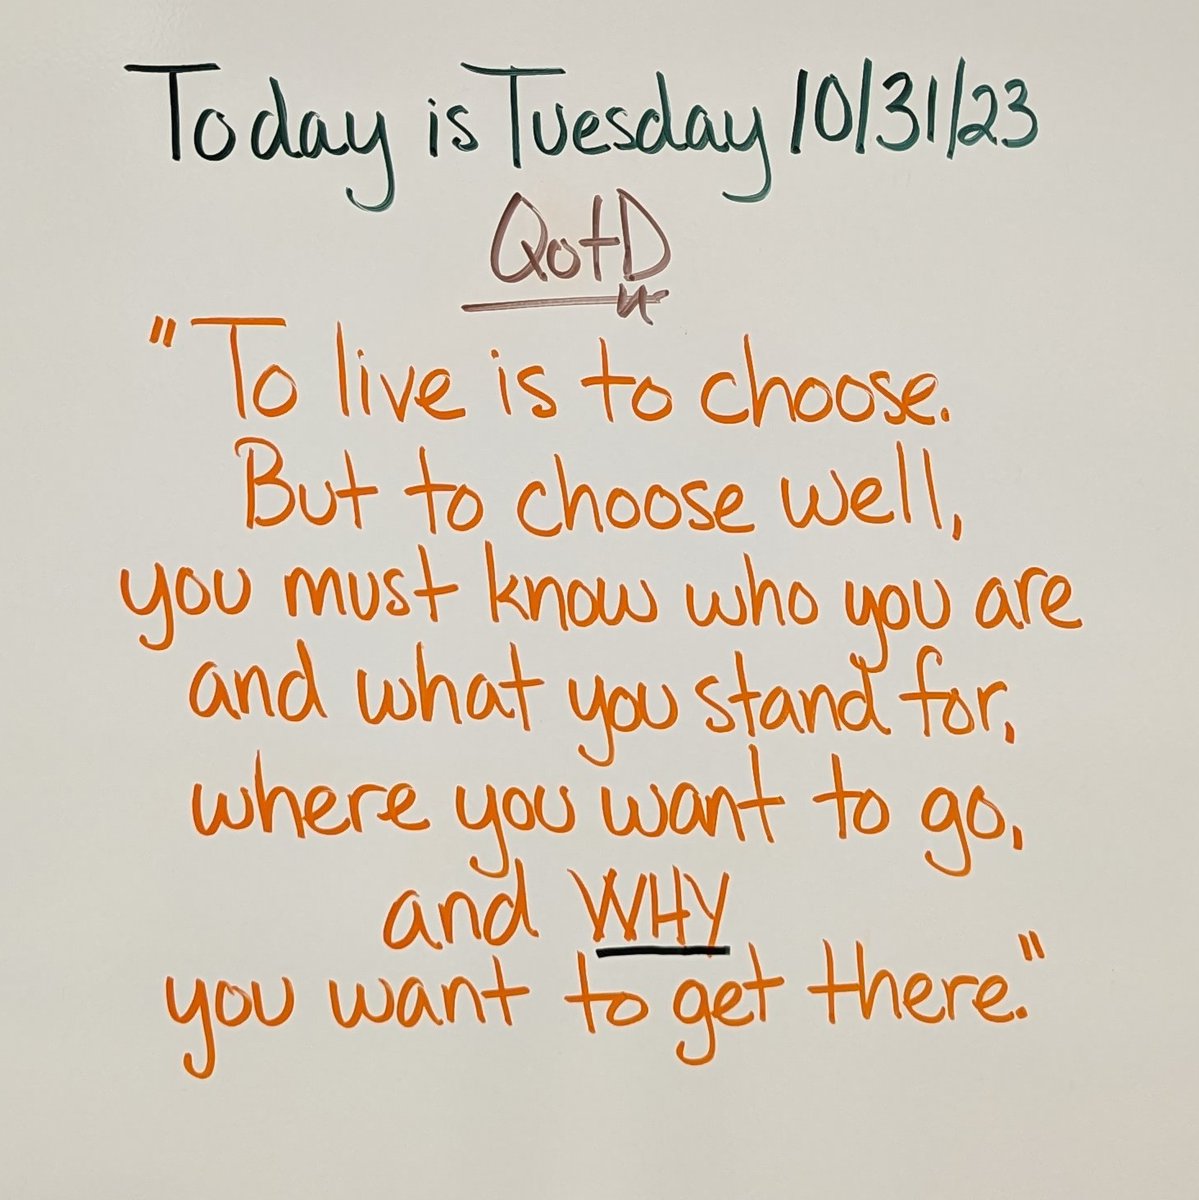 🎃 Happy Halloween 🎃
Today's board, courtesy of the 'Why'.
#WhatIsYourWhy